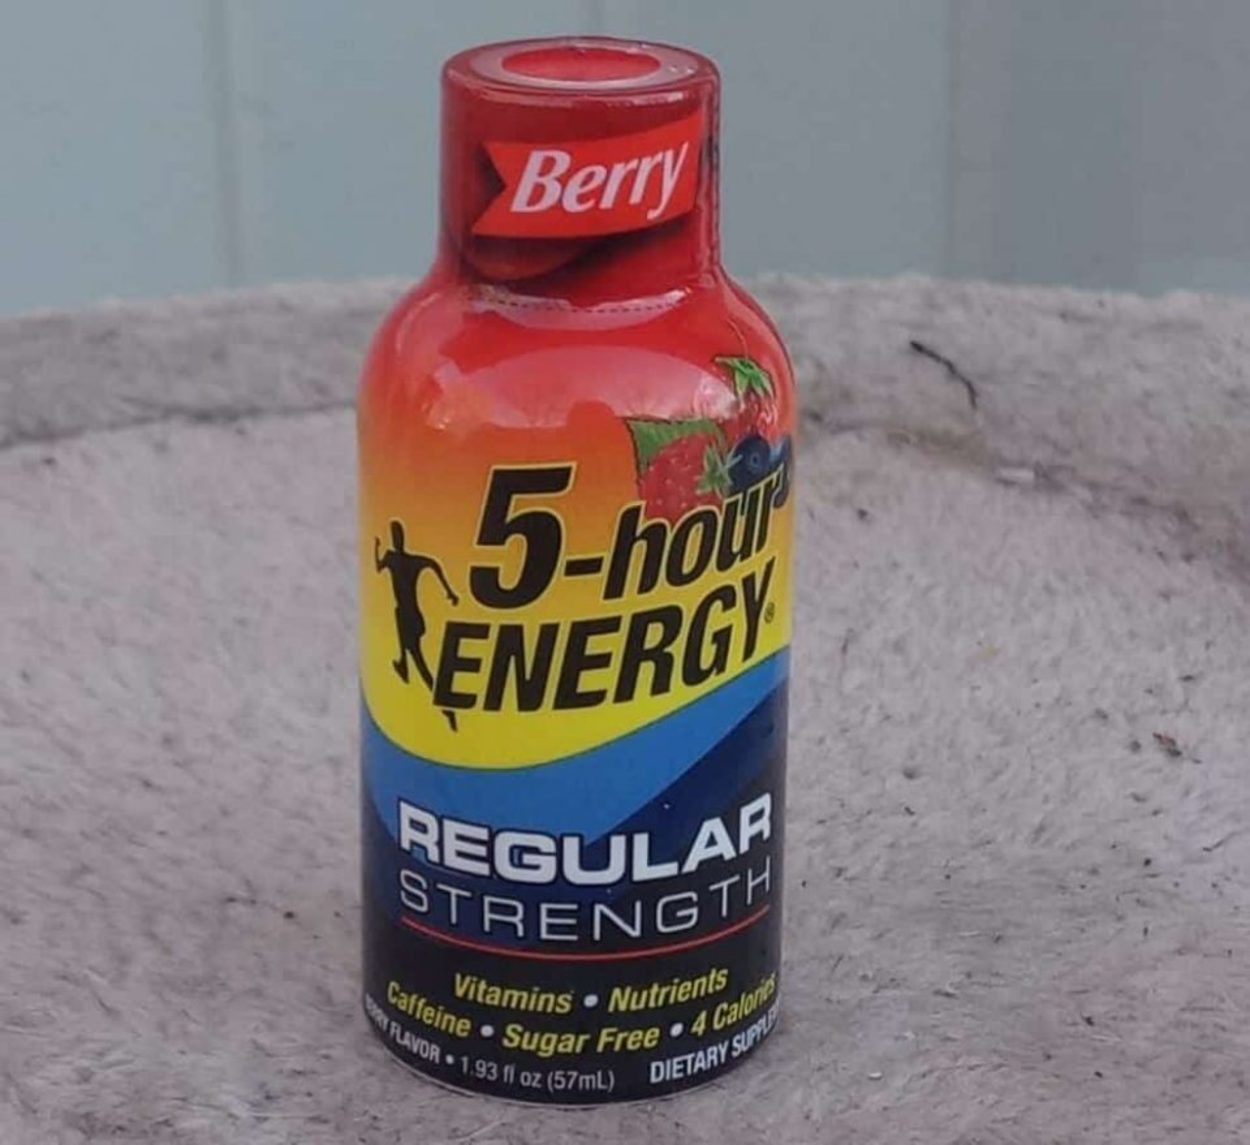 5 Hour Energy Caffeine and Ingredients (Full Info)